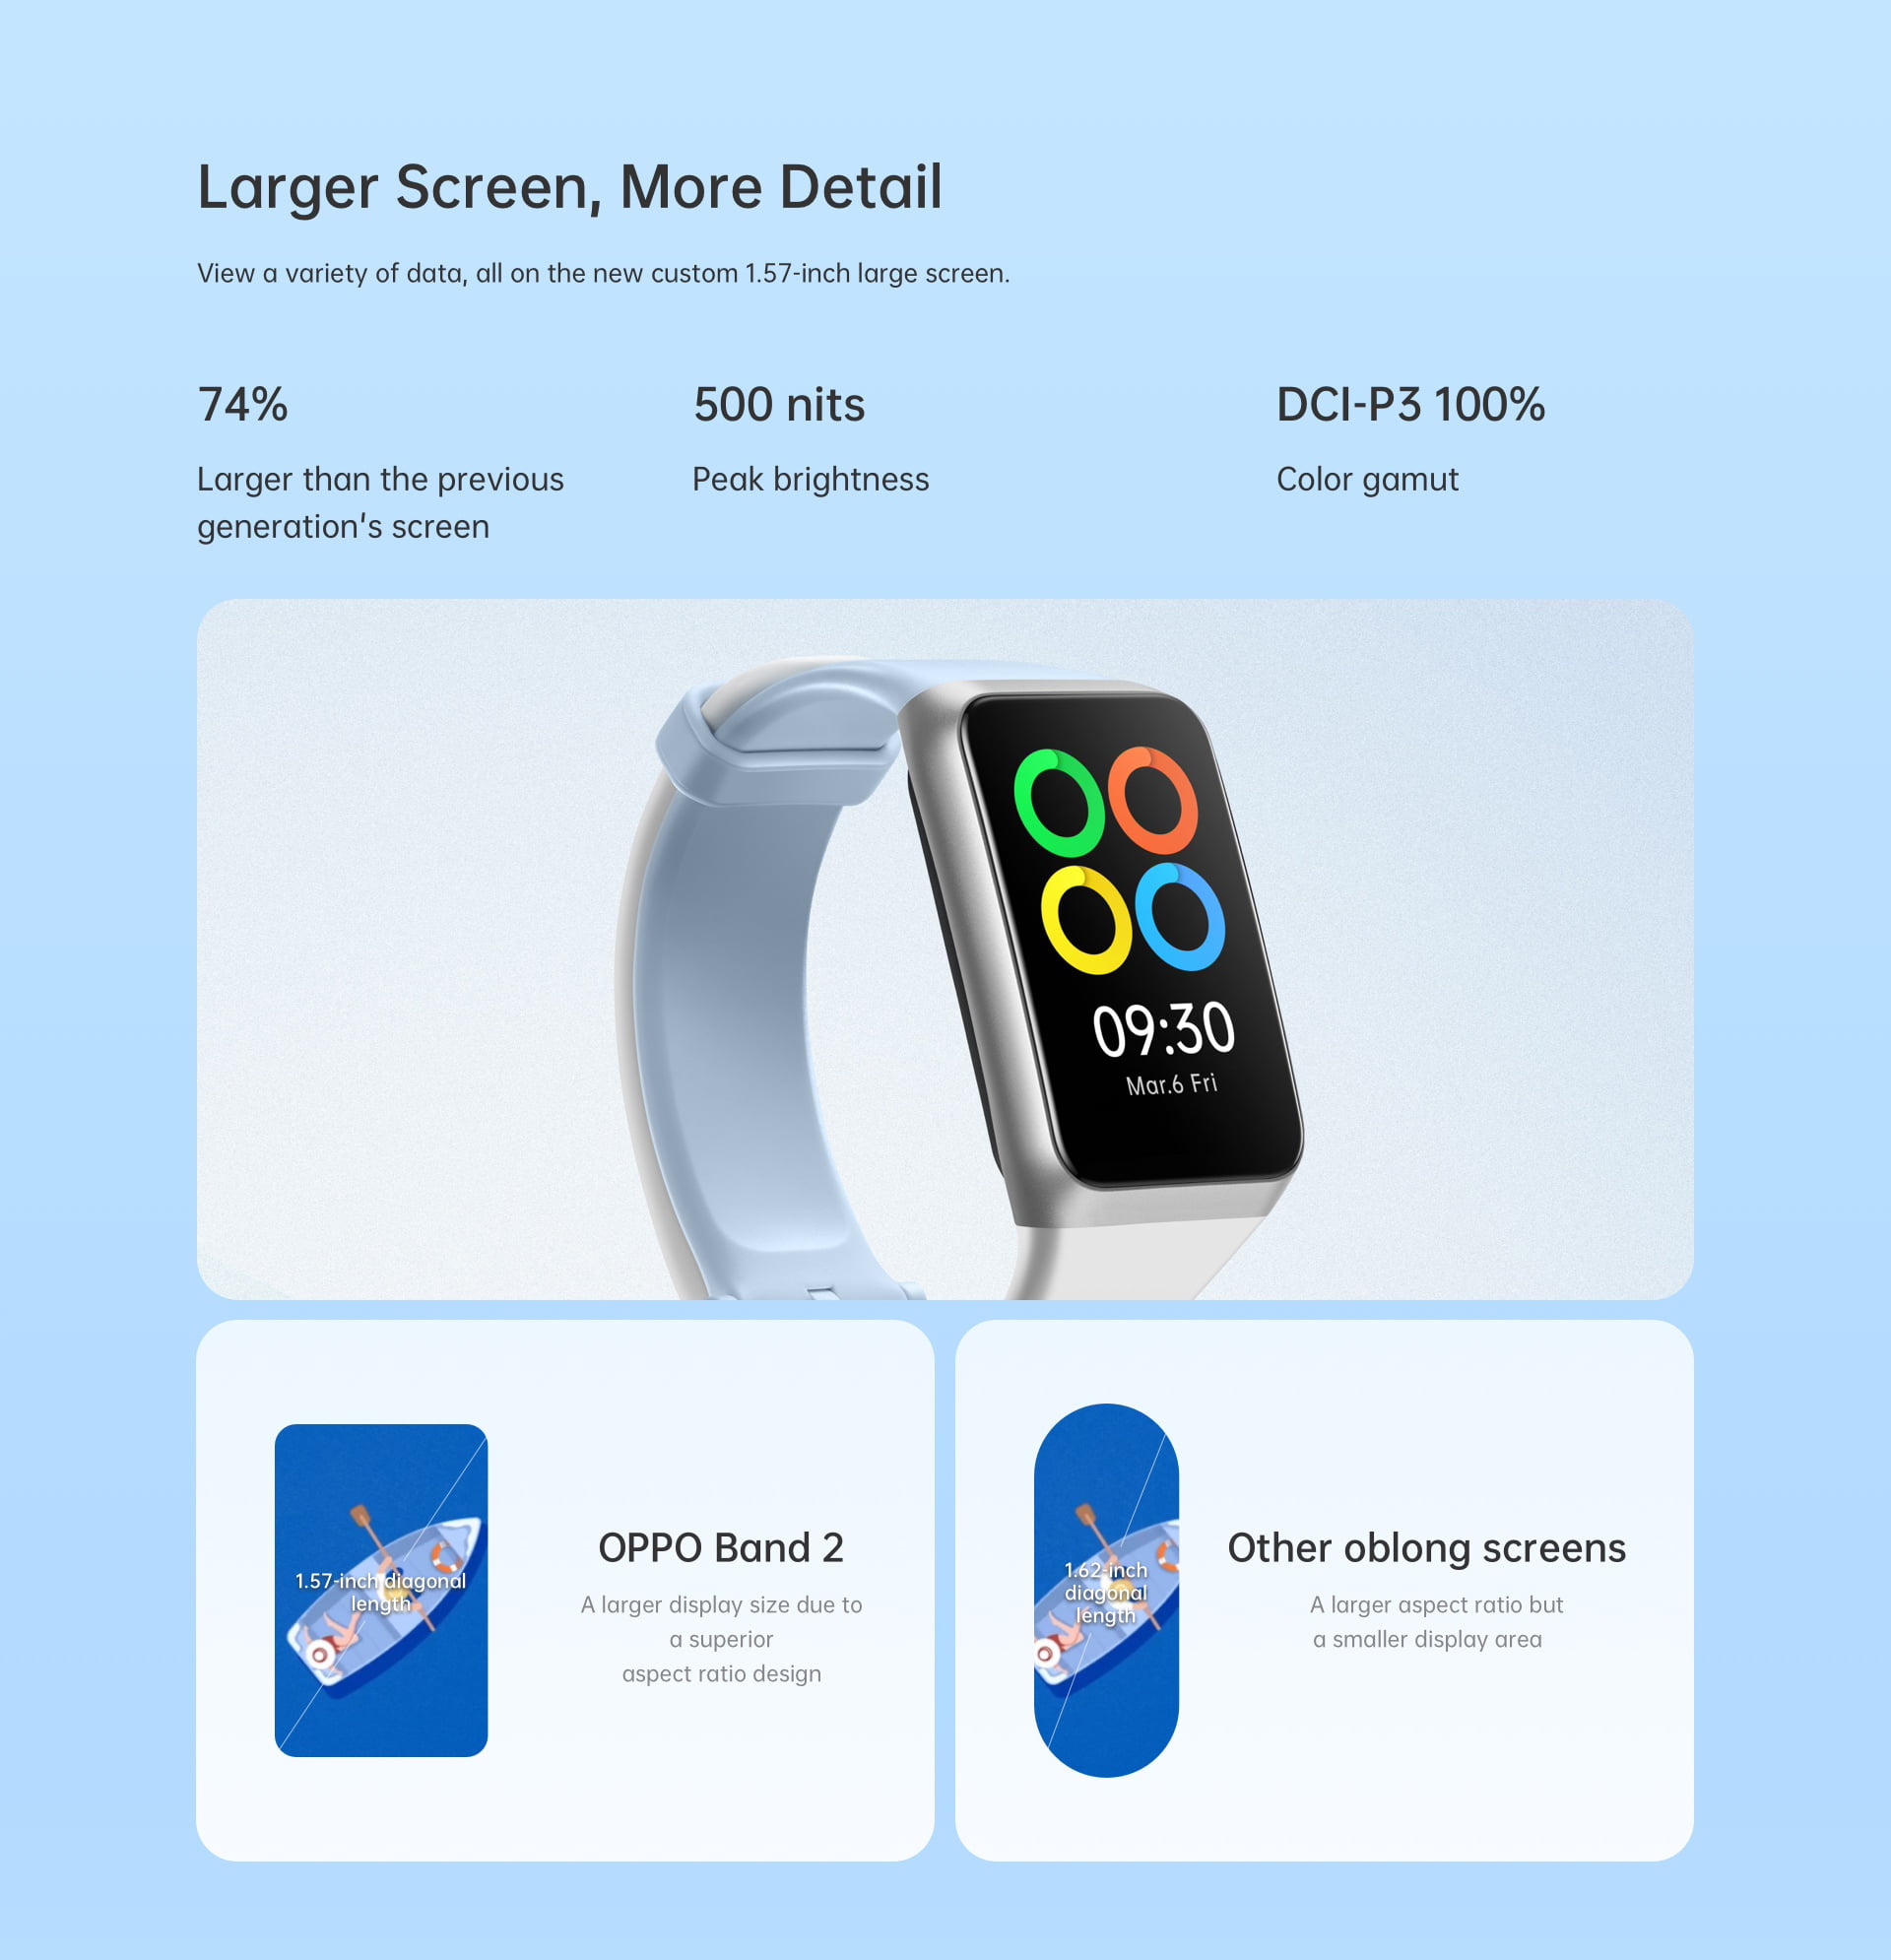 OPPO Band 2 Smart Fitness Tracker Watch – Baby Blue